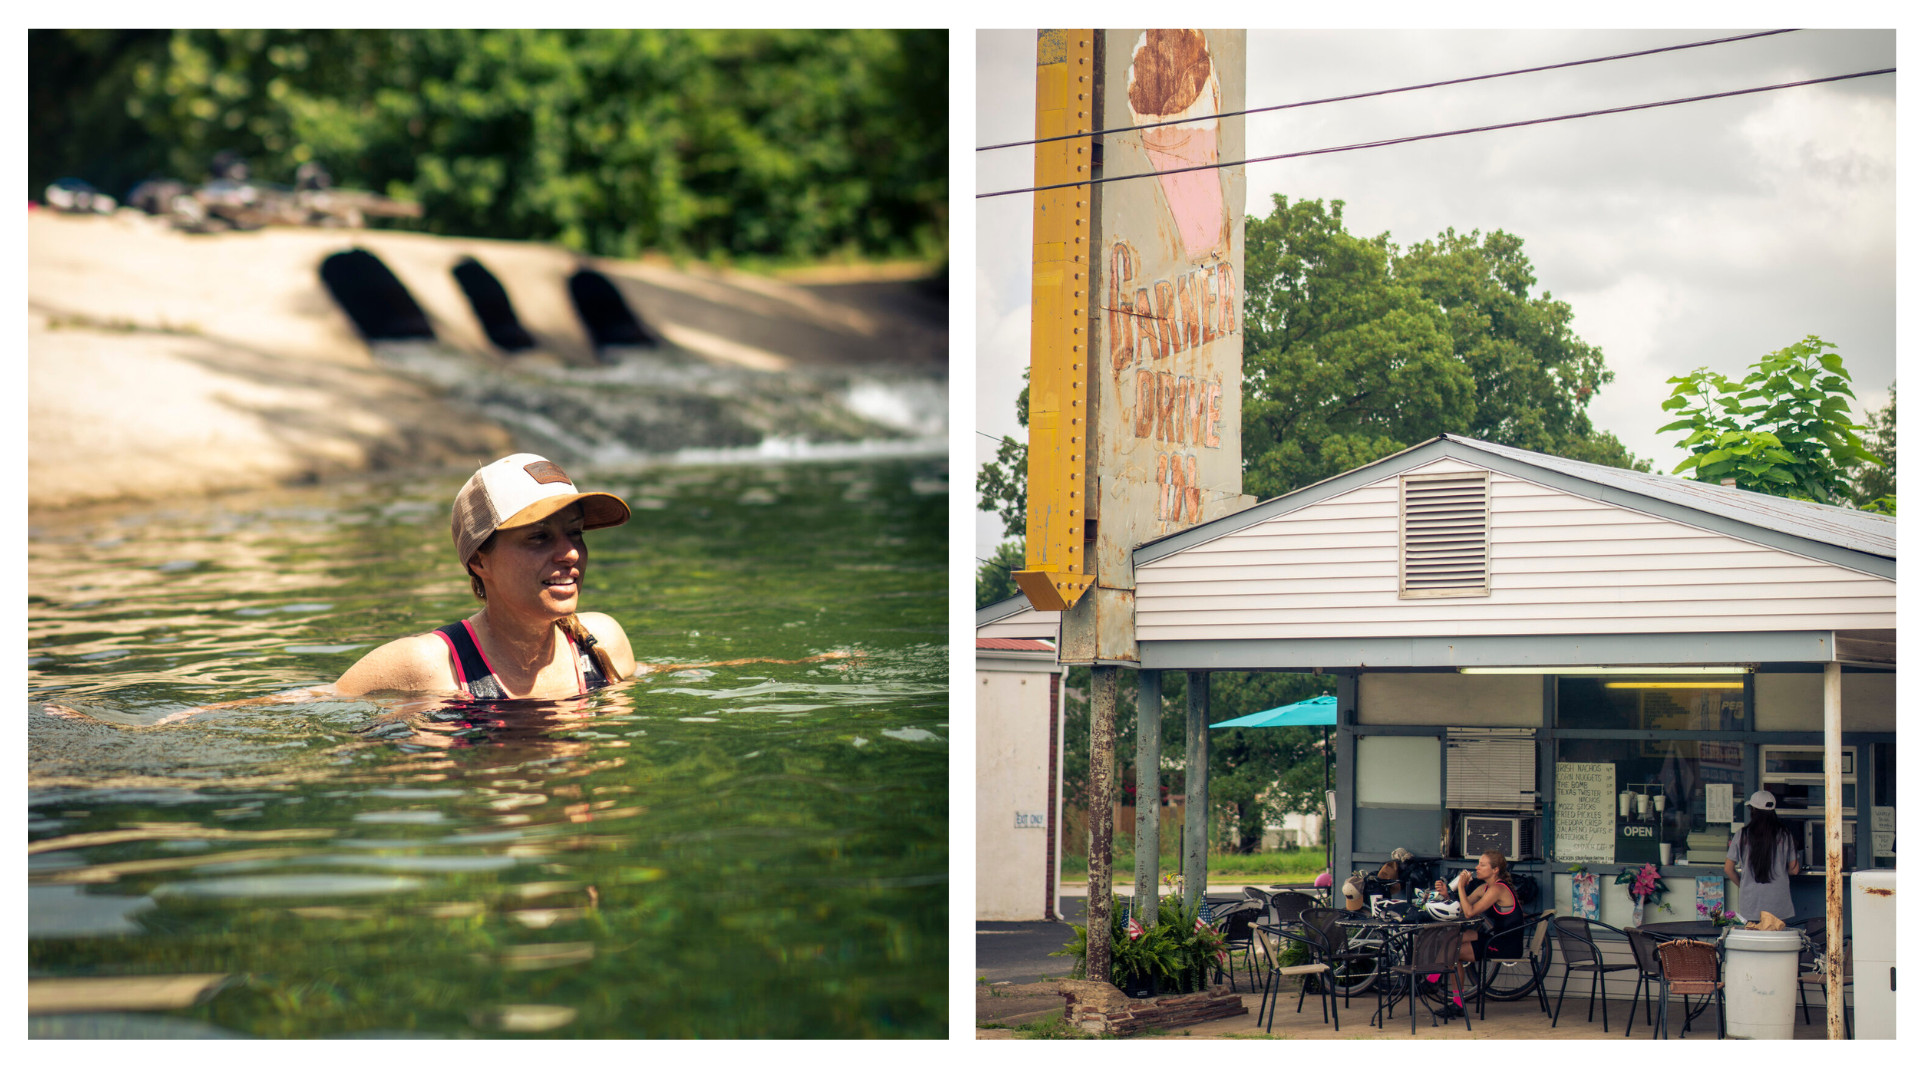 Collage with a photo of a female ride wading in the creek, and a photo of a female rider eating at a diner outside on a bench.